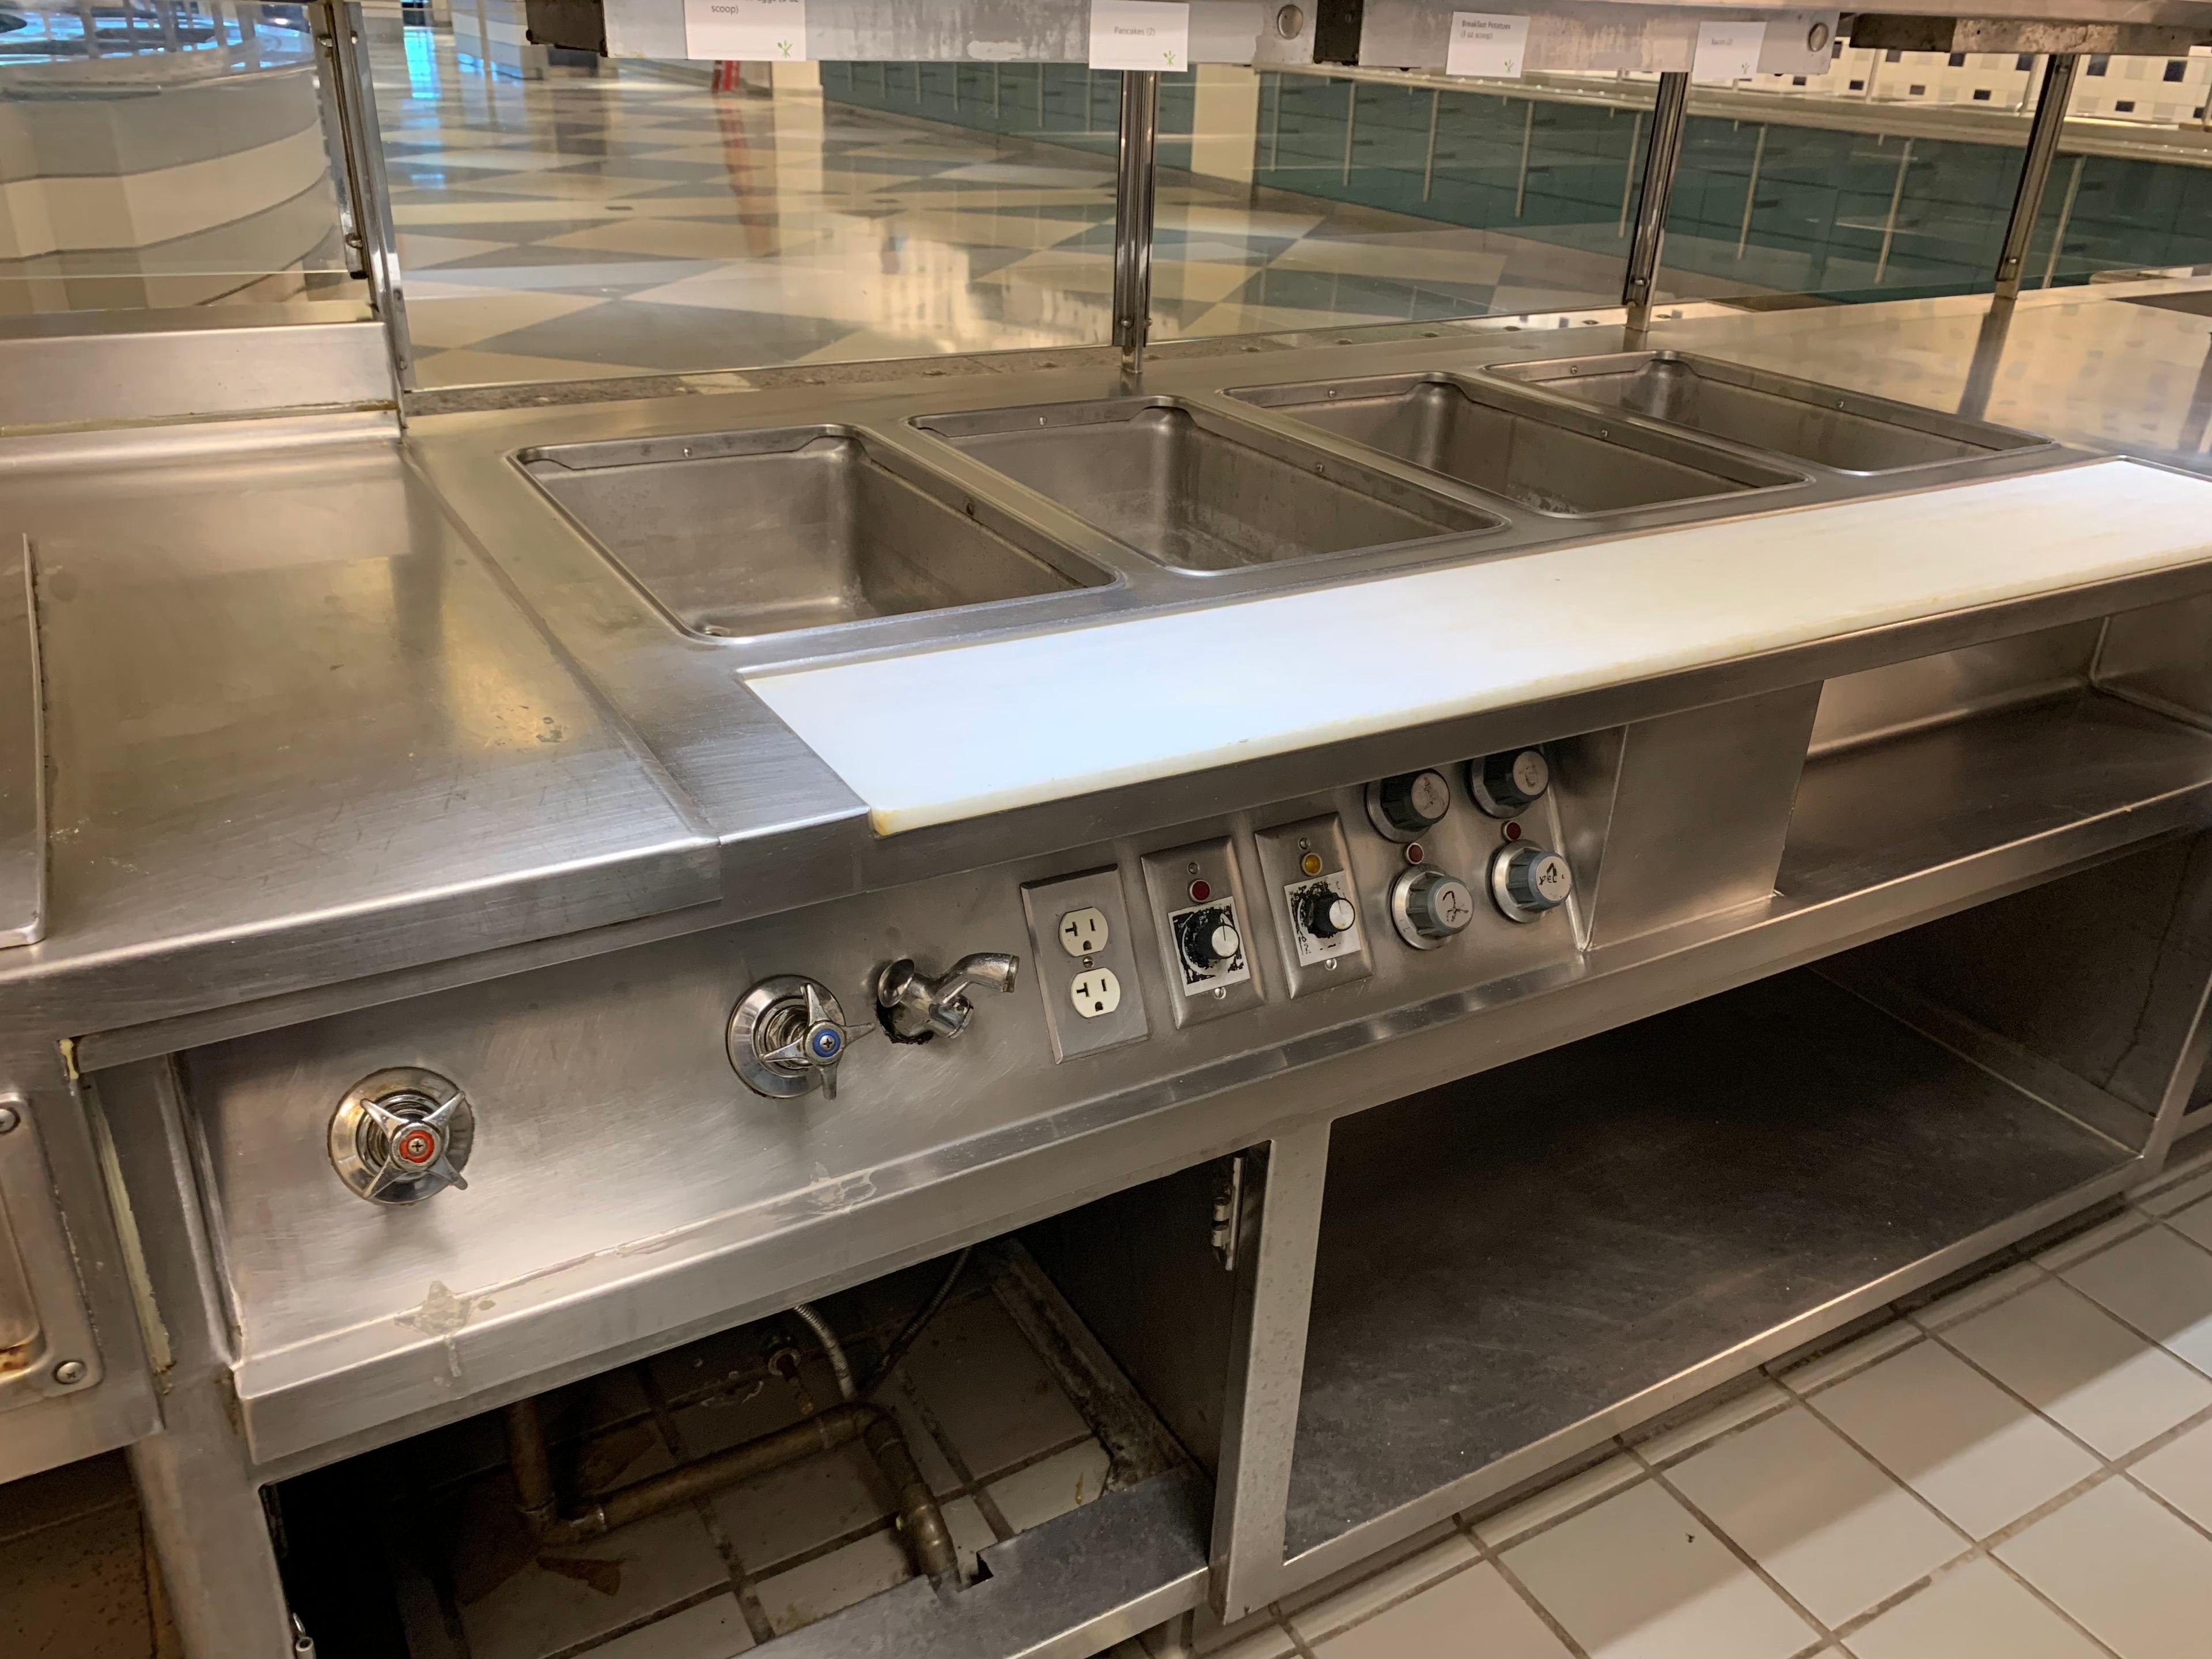 28"2 CAFETERIA COUNTER WITH GRIDDLE THAT NEEDS REPAIR, 6 HOT WELLS, 36" ICE